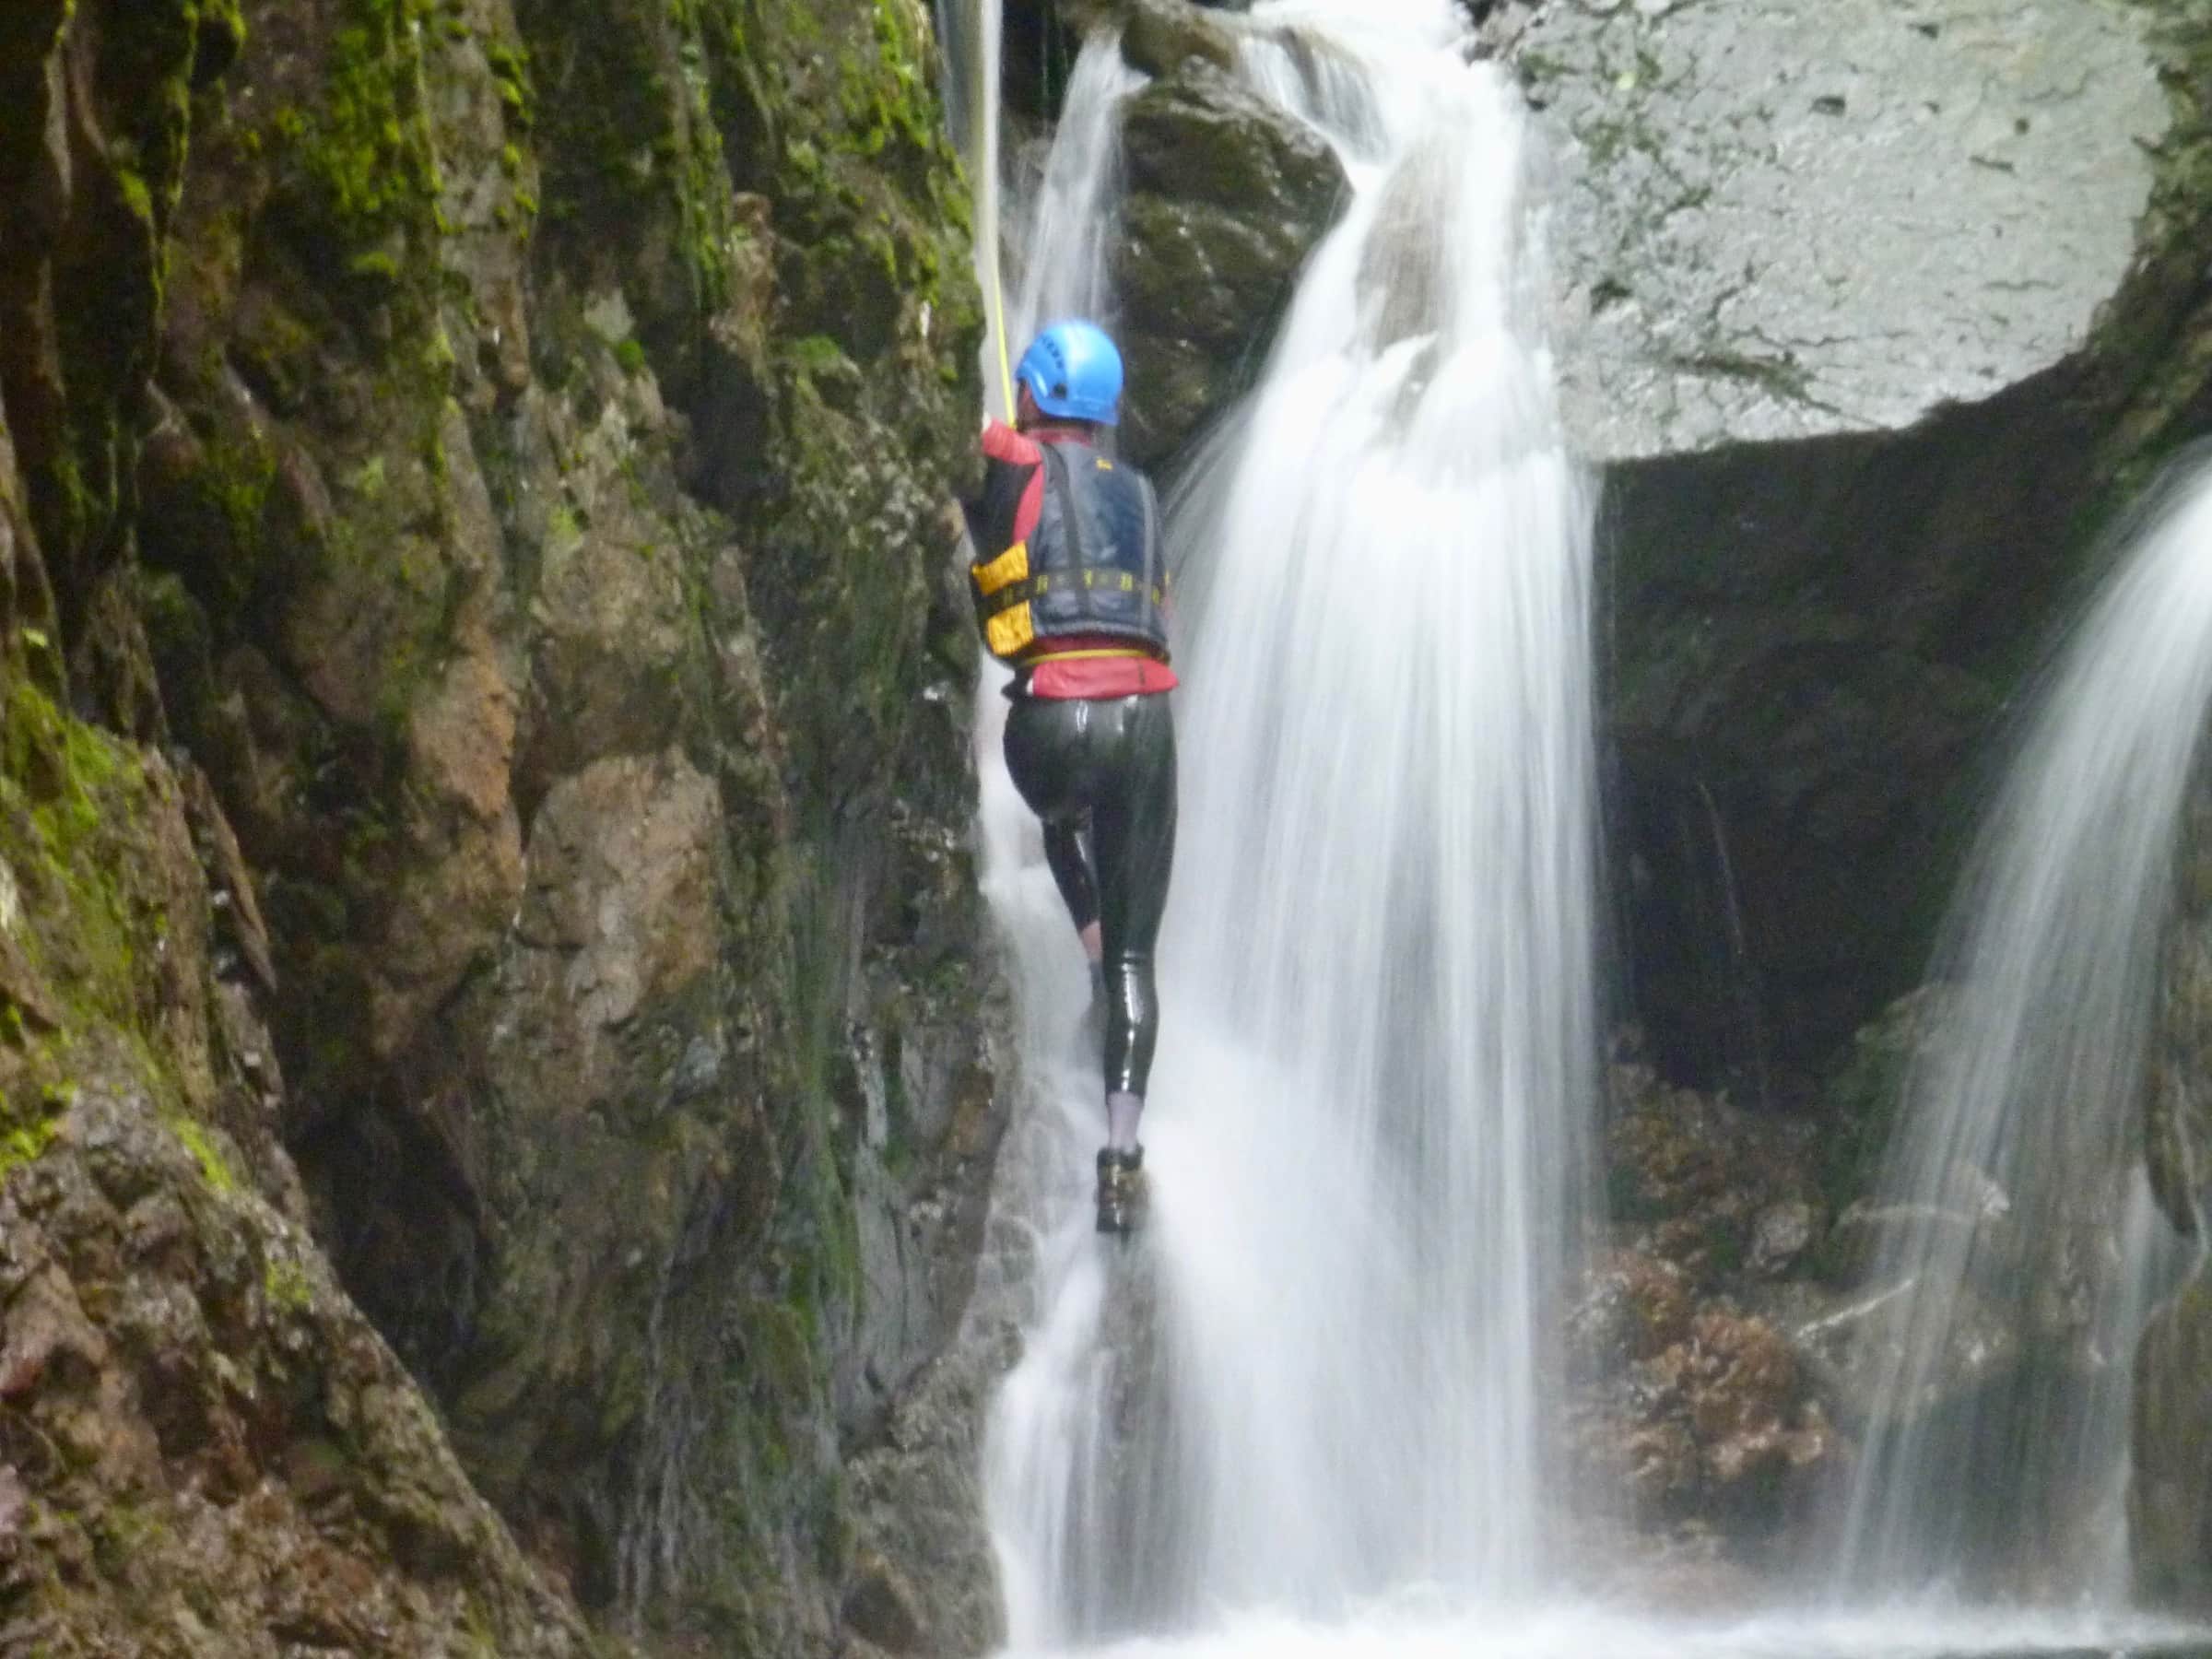 ghyll scrambling in the lake district and canyoning in church beck